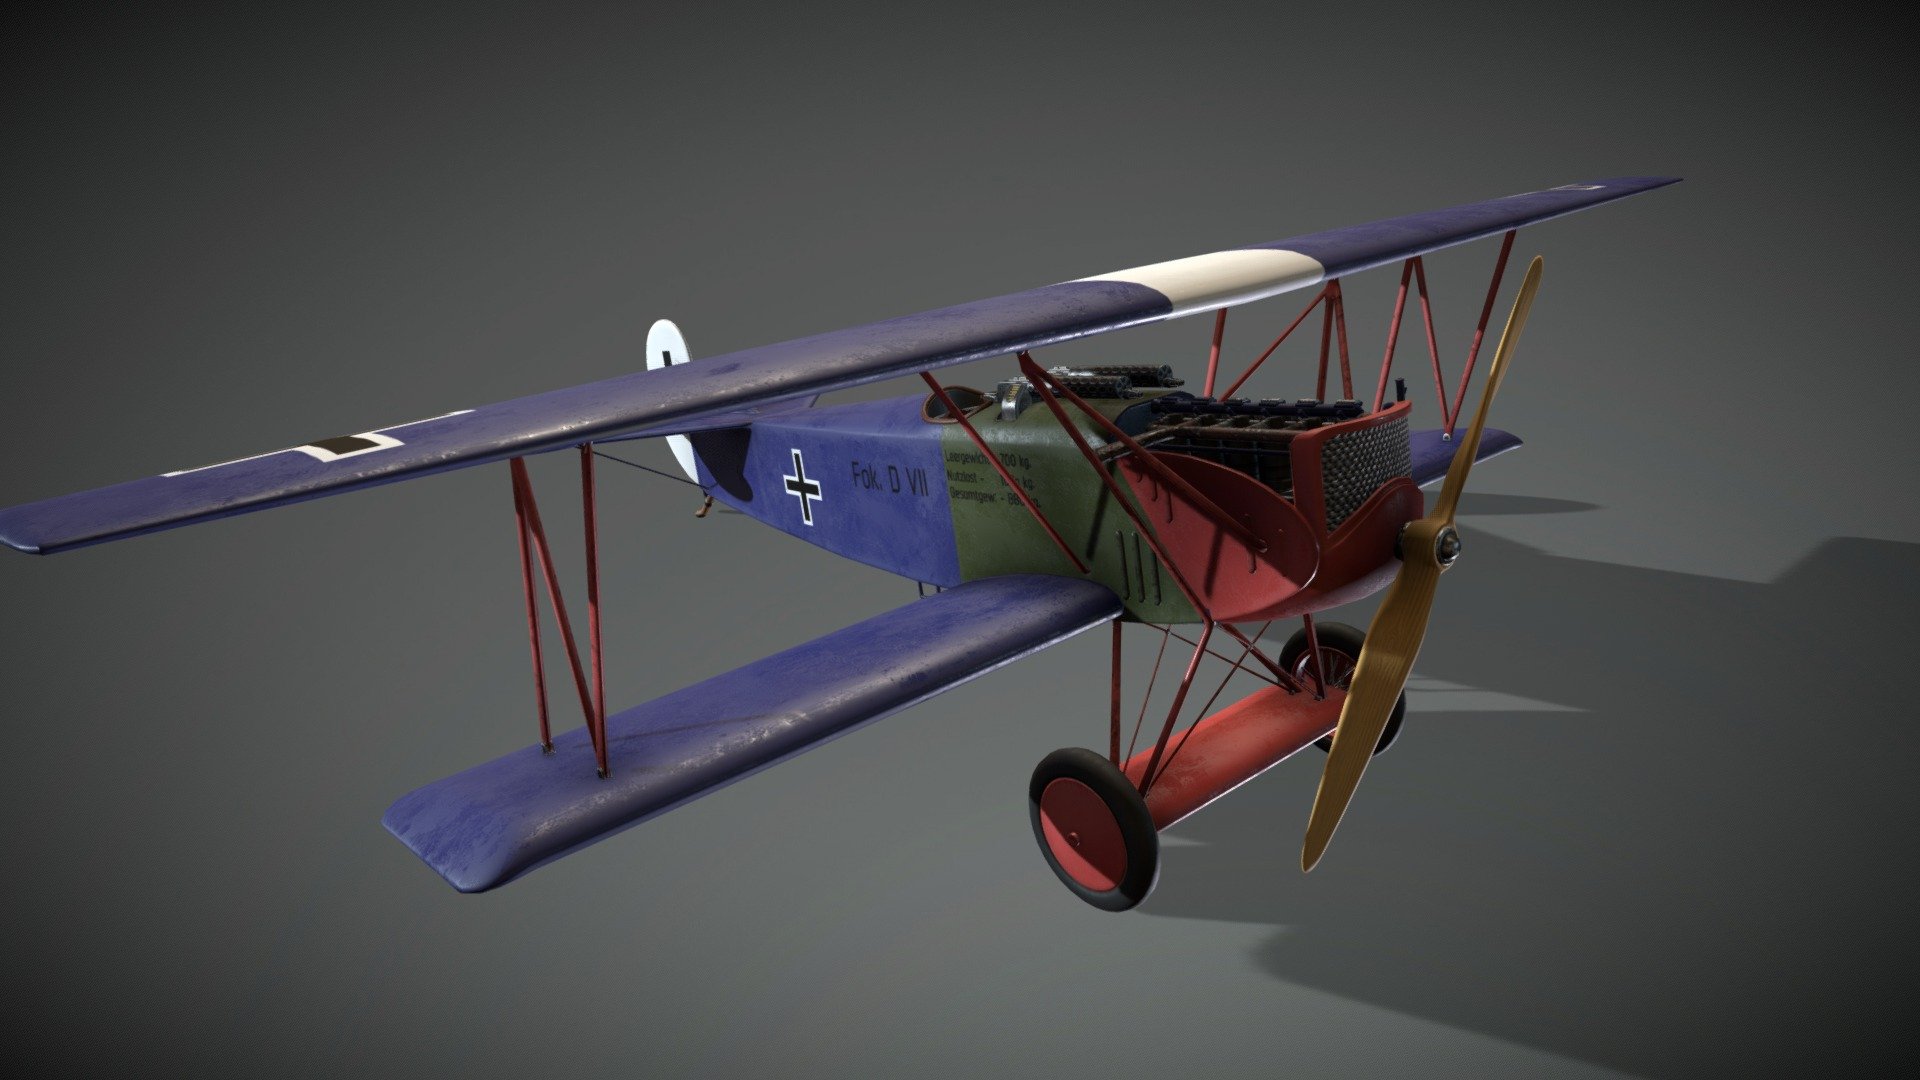 3D Model for Escape Germany (PC-Game)
Fully rigged an animated ingame. 

Flight Example BF109: https://www.youtube.com/watch?v=jb6zUBnfUZE&amp;t=8s

Model + Textures by: David Falke

Rigged + Animations by: Spaehling

Website: https://www.grip420.com/

Discord: Follow us on Discord

Facebook Follow us on Facebook

Game  Escape Germany - Escape Germany - Fokker D VII - 3D model by GRIP420 3d model